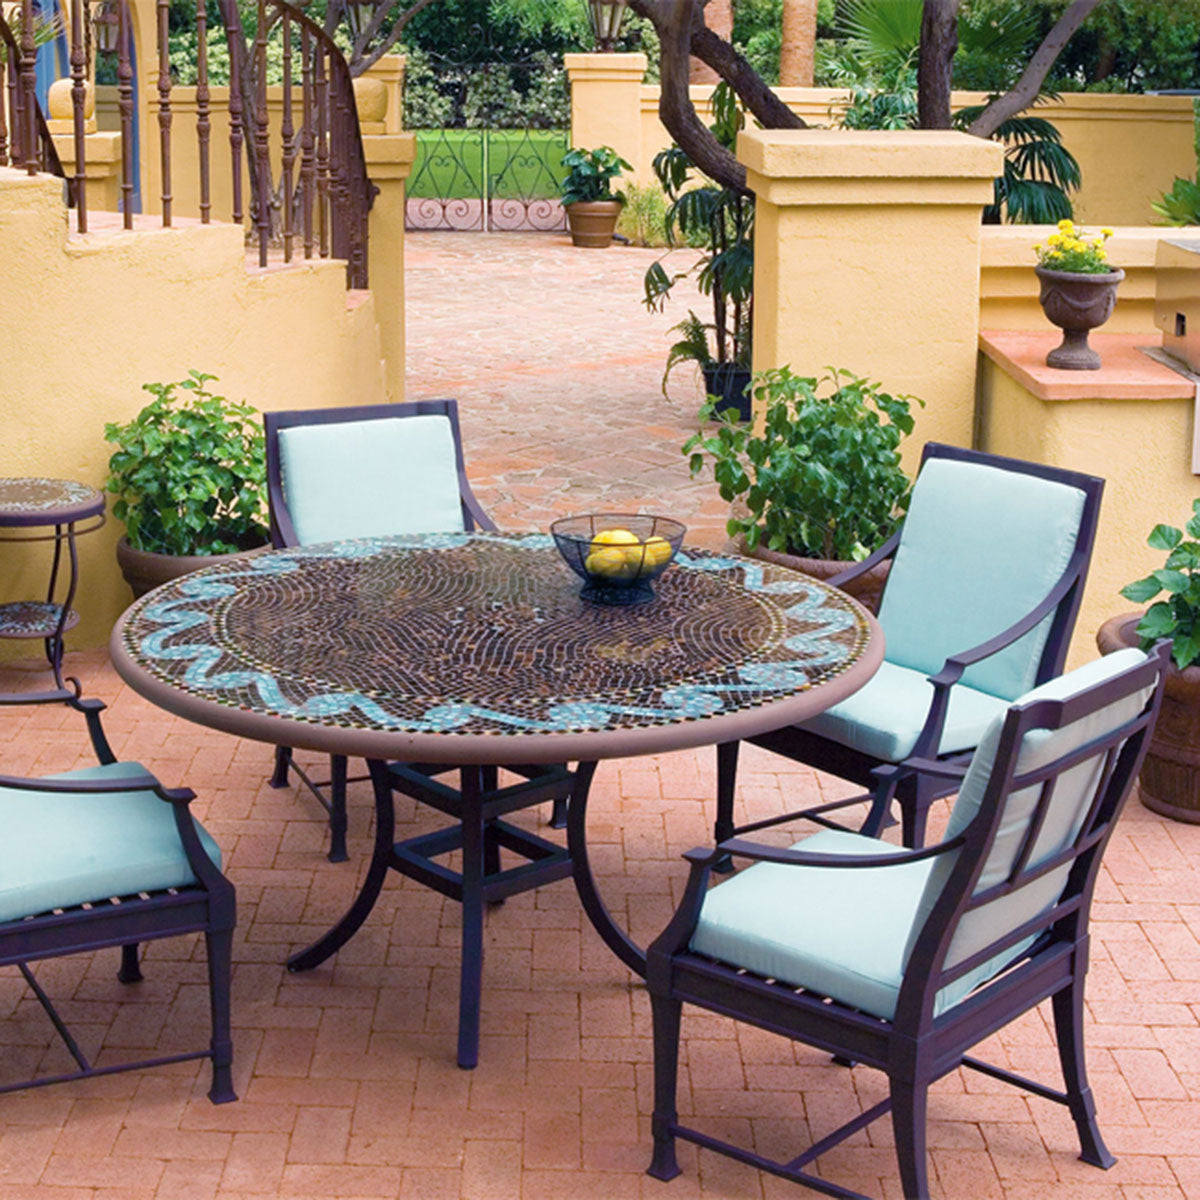 60" KNF Mosaic Patio Tables